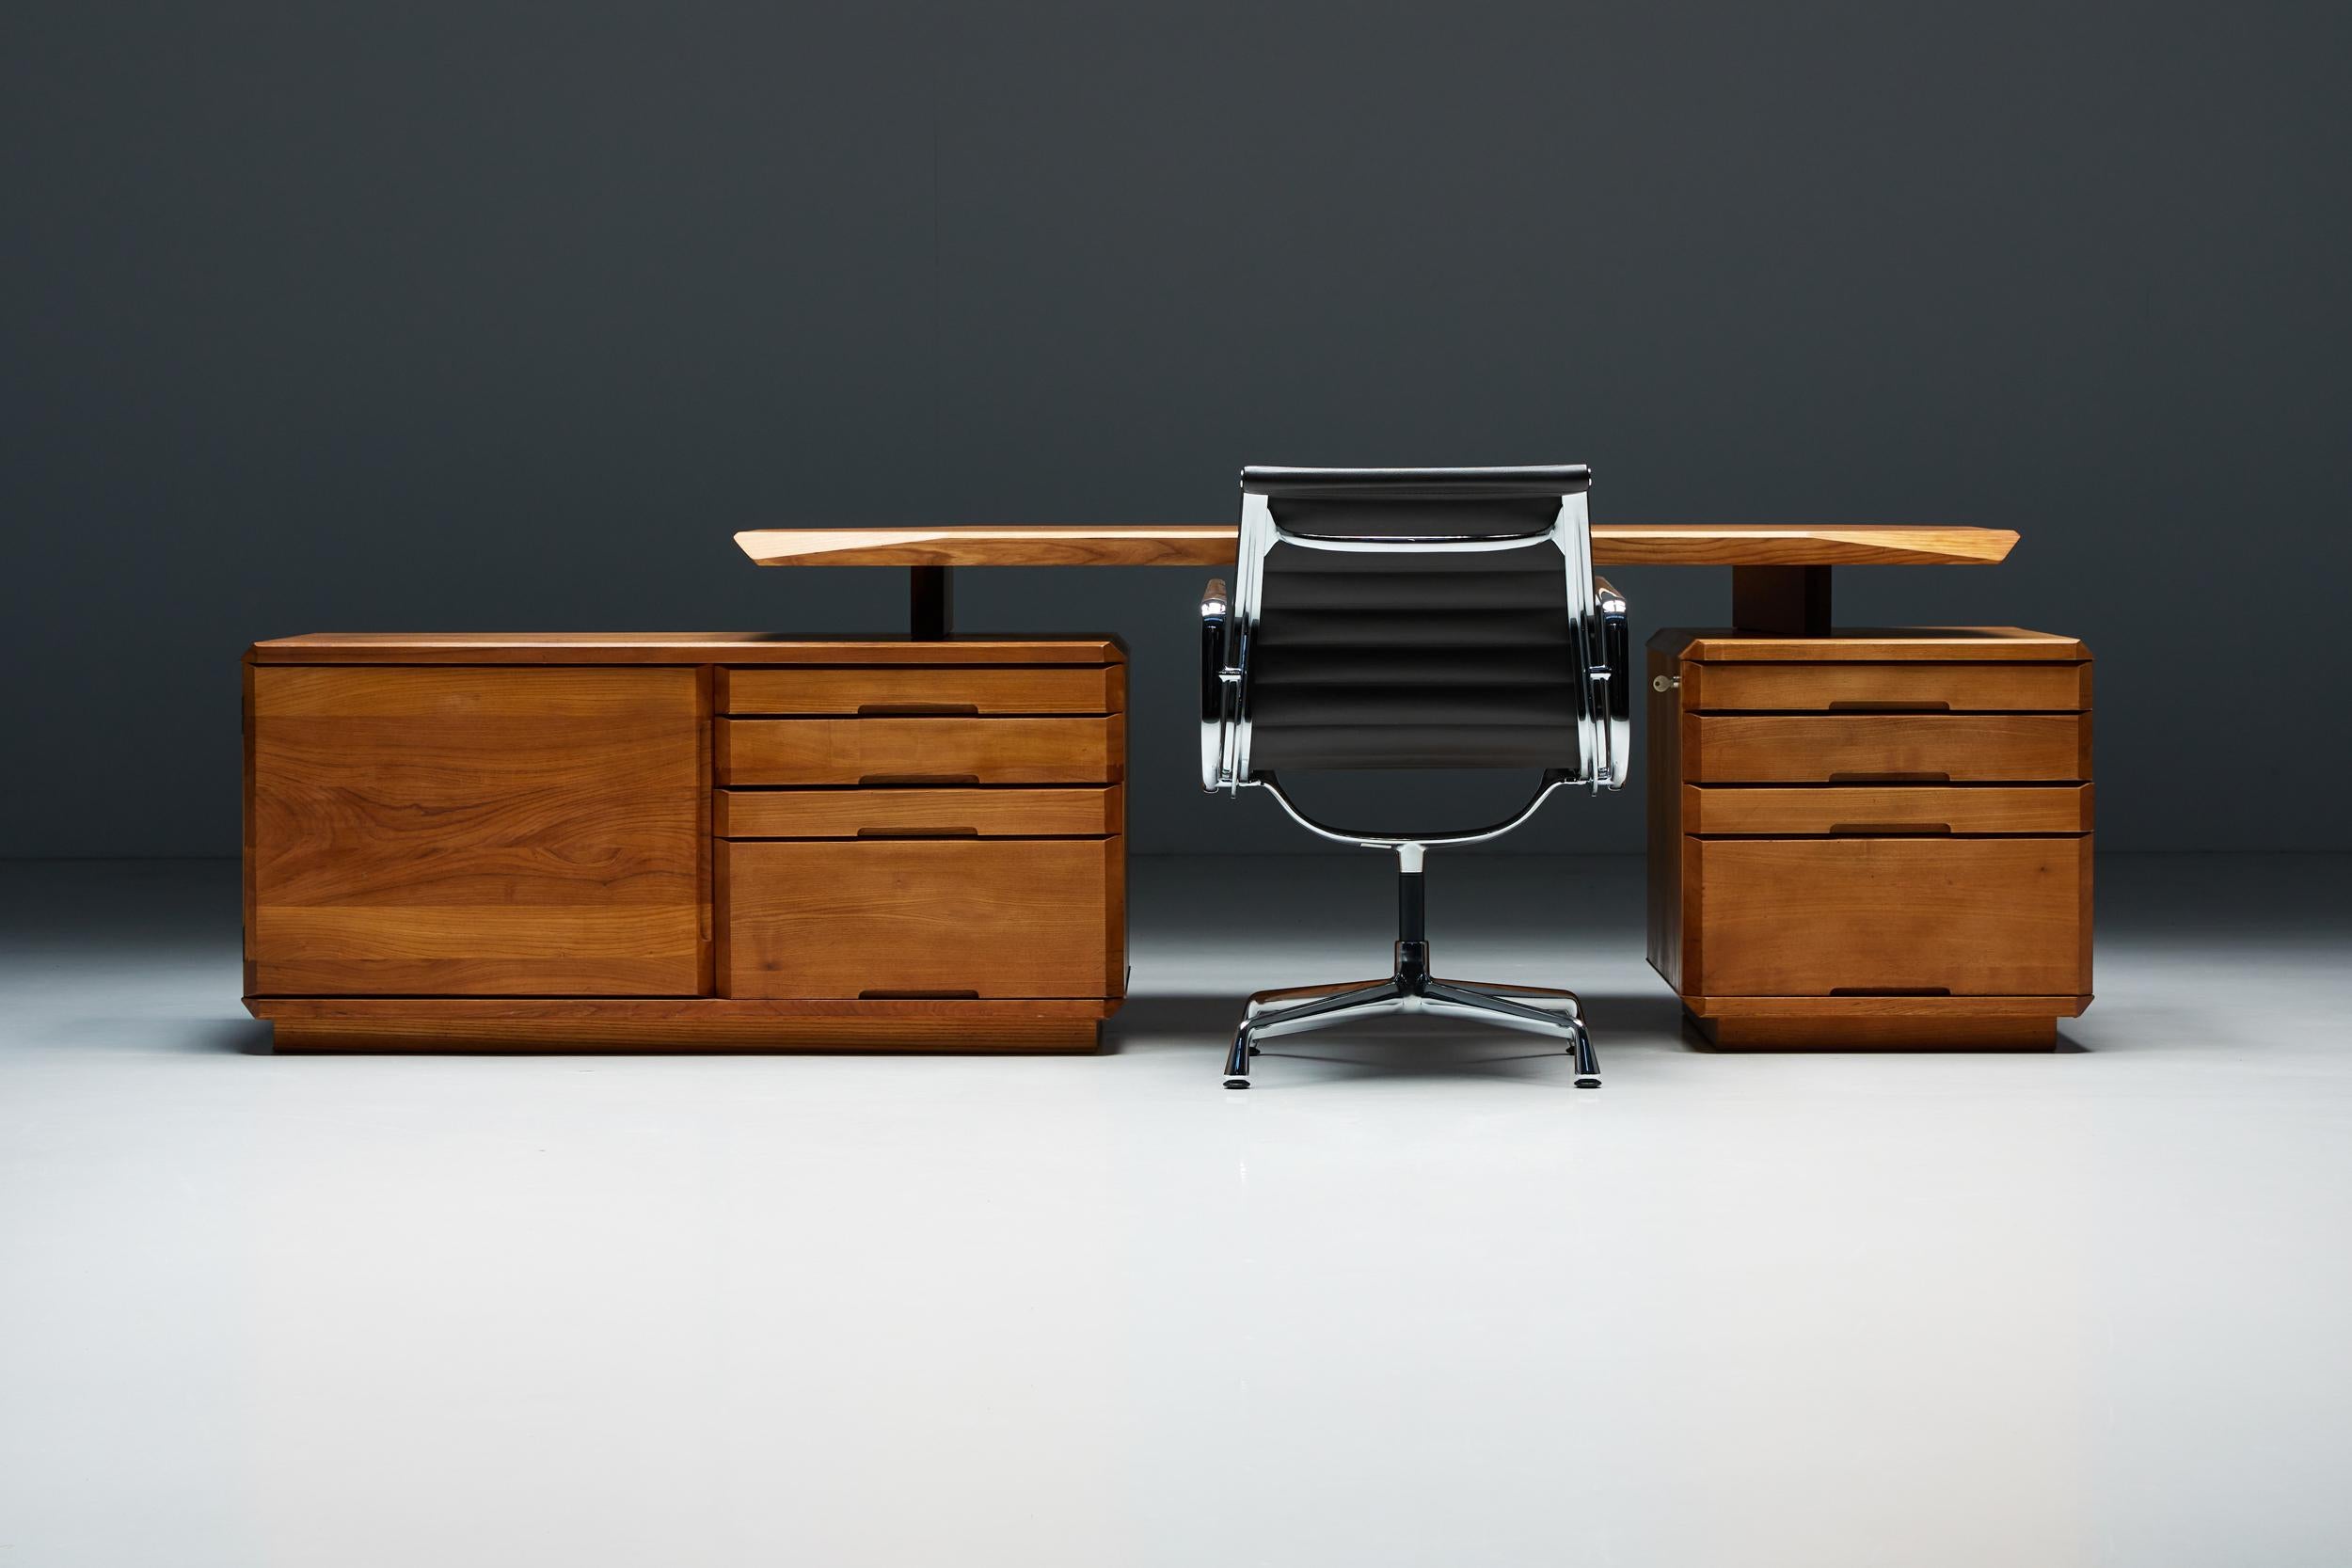 B40 desk; Pierre Chapo; Woodwork; Wood Joints; Elm Wood; Cabinets; Shelves; Mid-Century Modern; Modernist; France; 1960s;

B40 desk by furniture designer Pierre Chapo, a true masterpiece that is sure to elevate any workspace. Crafted from solid